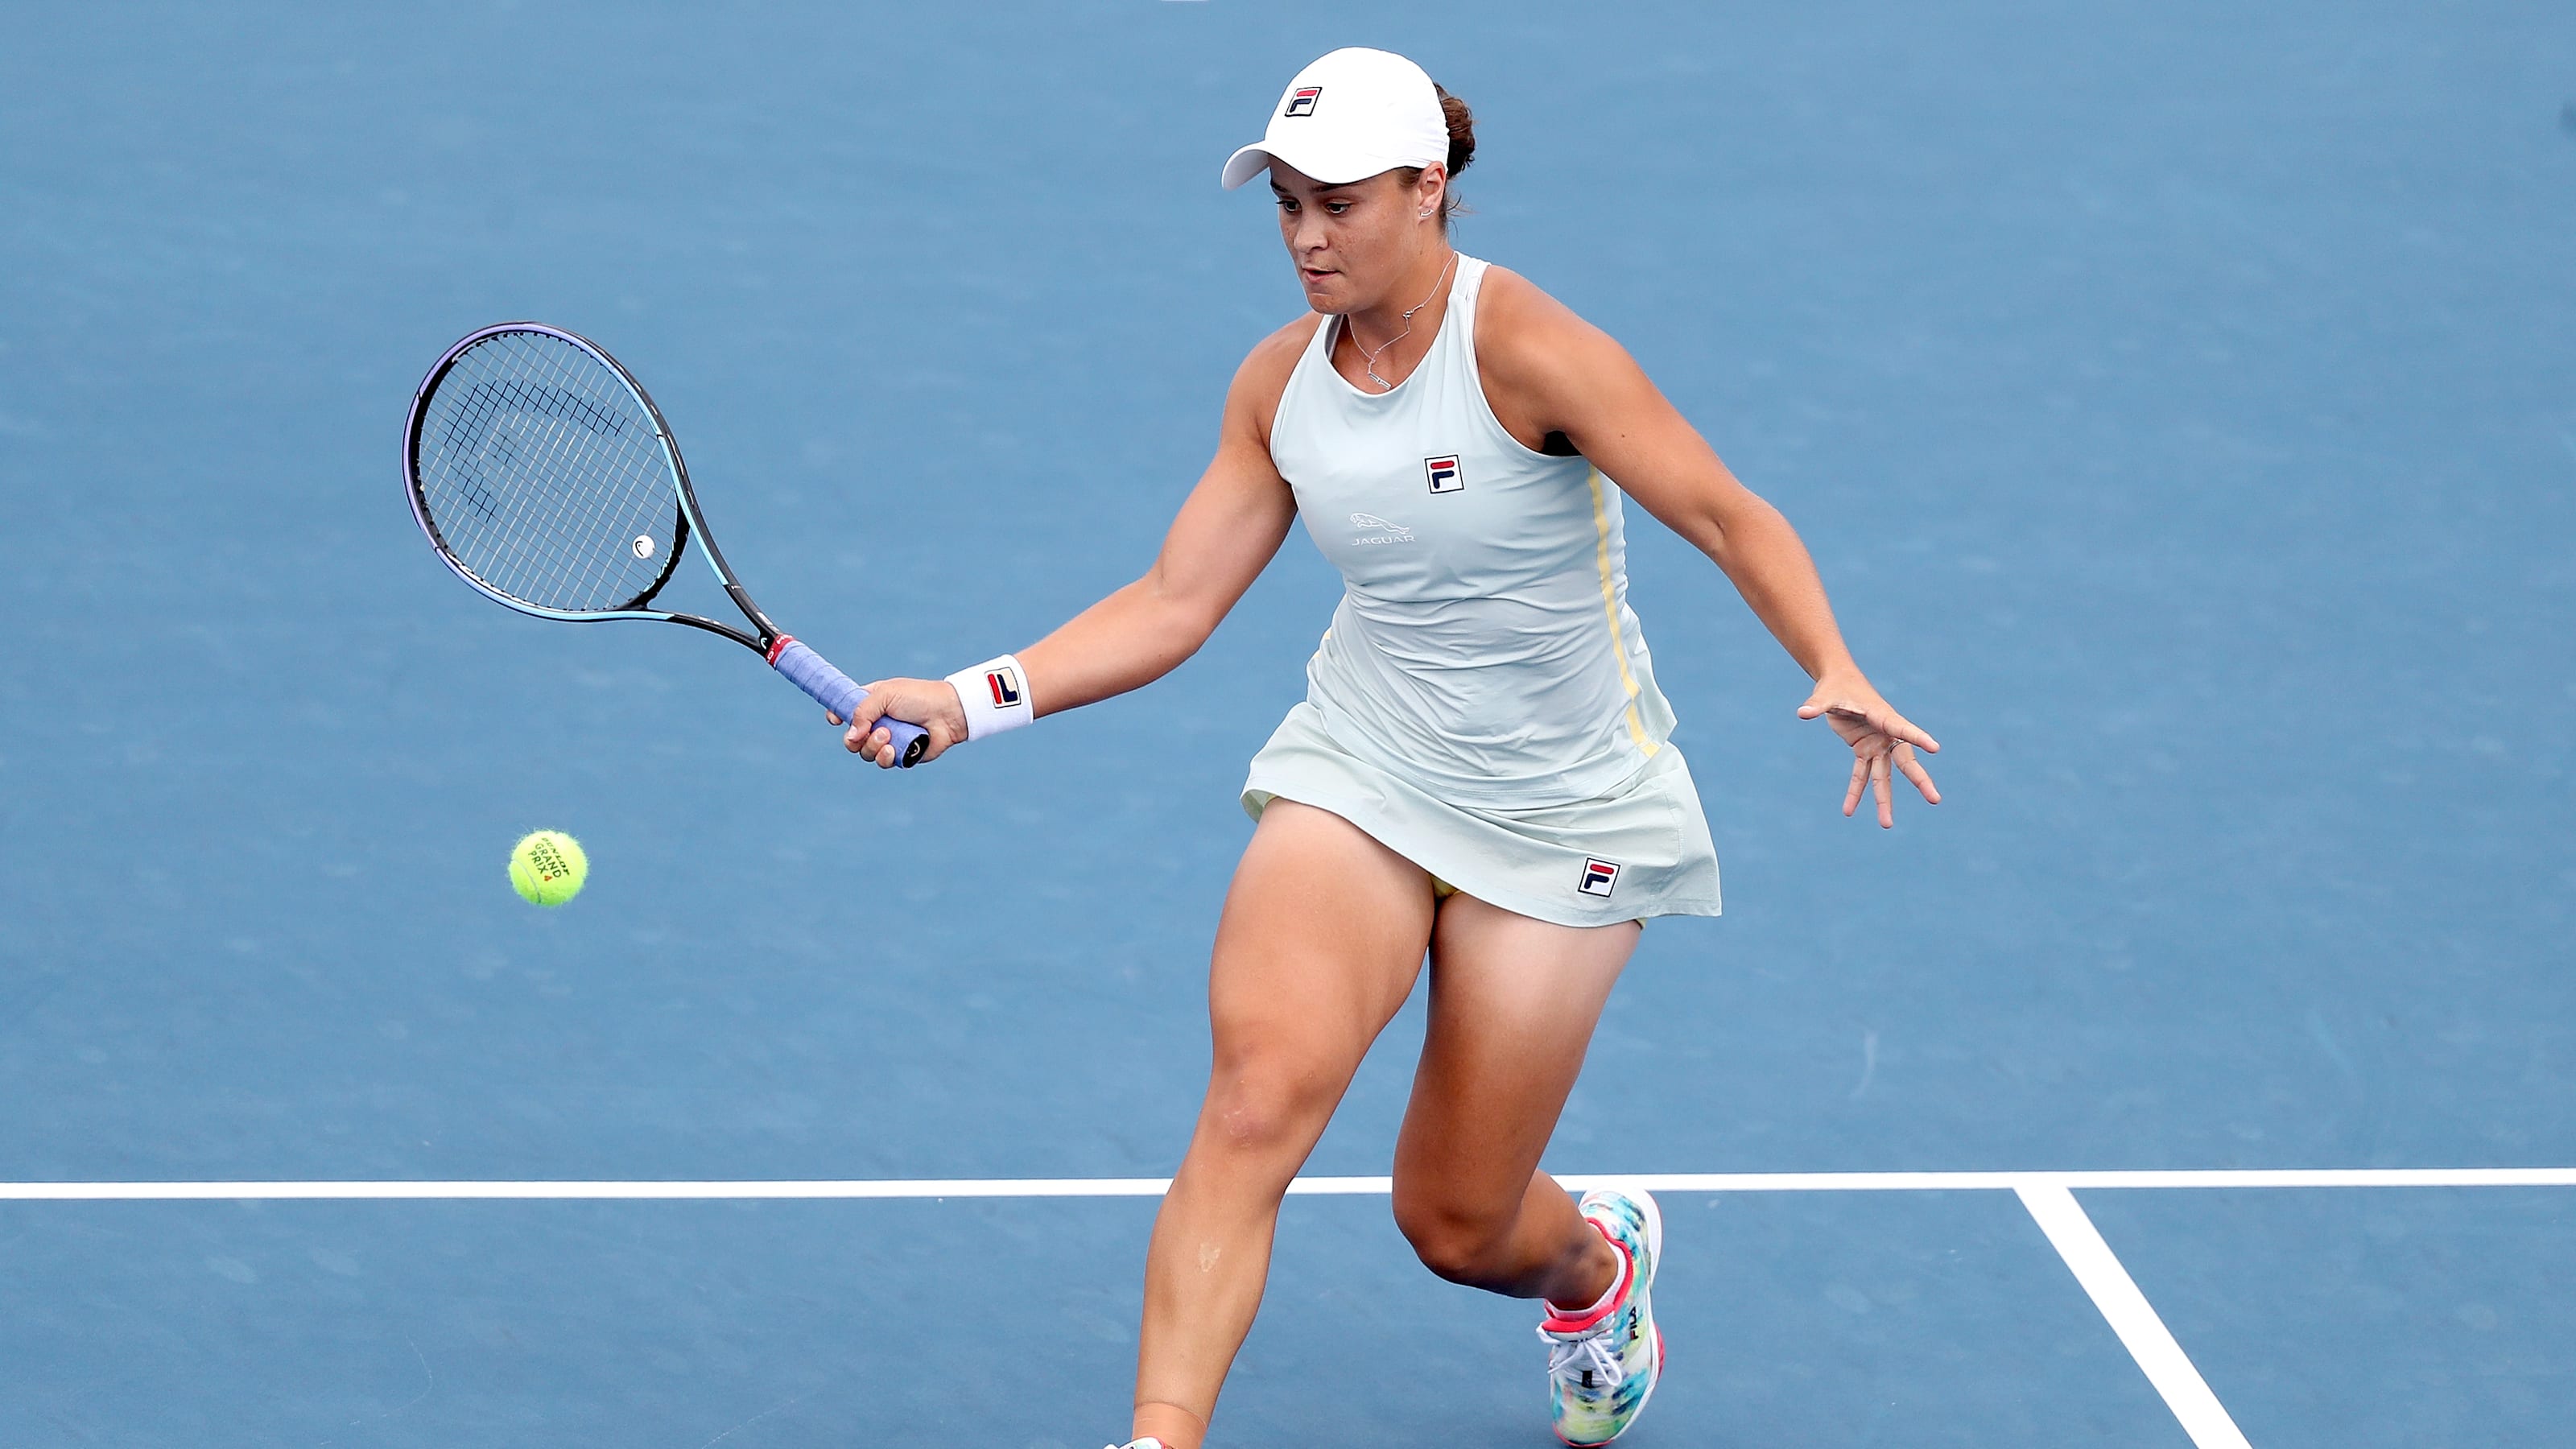 Top-ranked Ashleigh Barty defeats Barbora Krejcikova for the semifinals of the Western and Southern Open